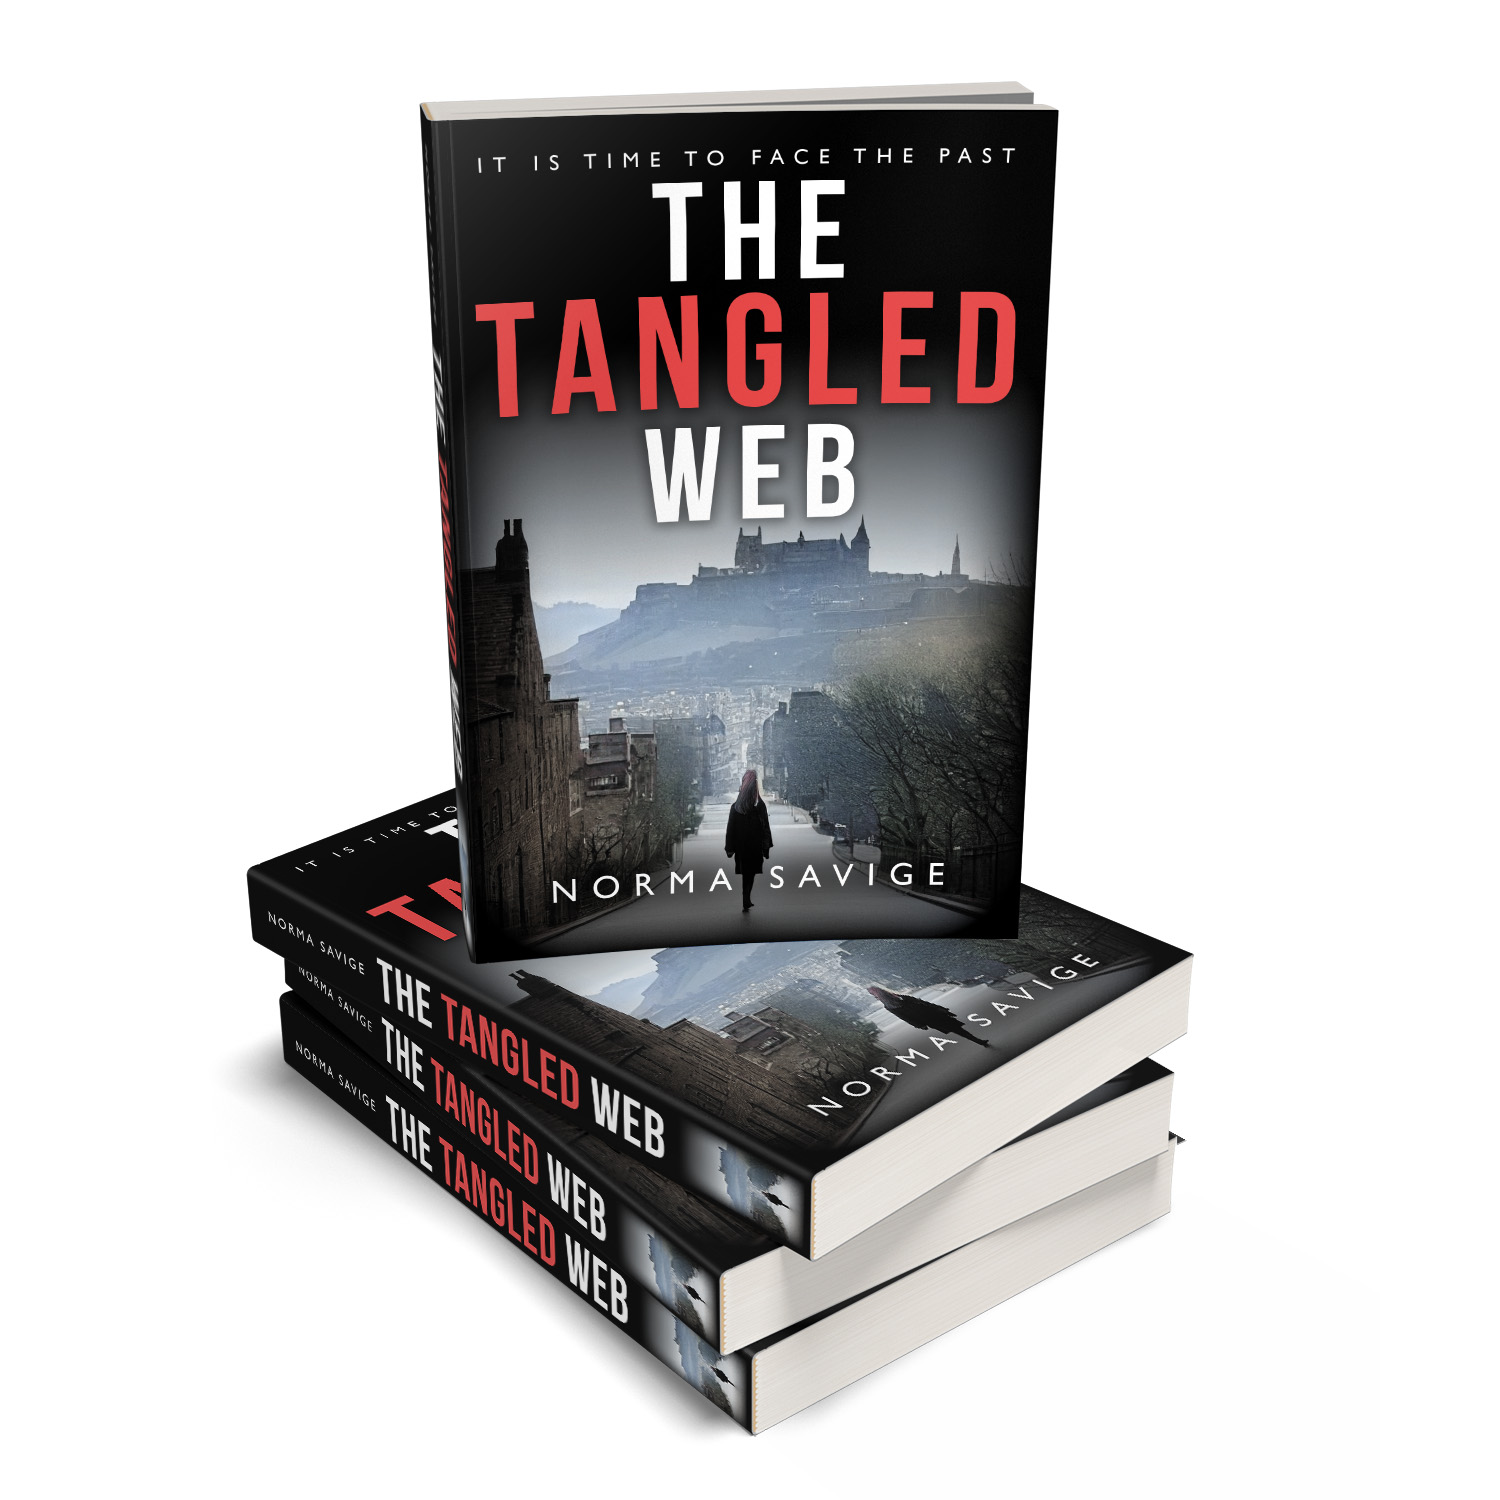 'The Tangled Web' is a slowburning crime thriller set in Edinburgh. The author is Norma Savige. The book cover and interior design are by Mark Thomas. To learn more about what Mark could do for your book, please visit coverness.com.